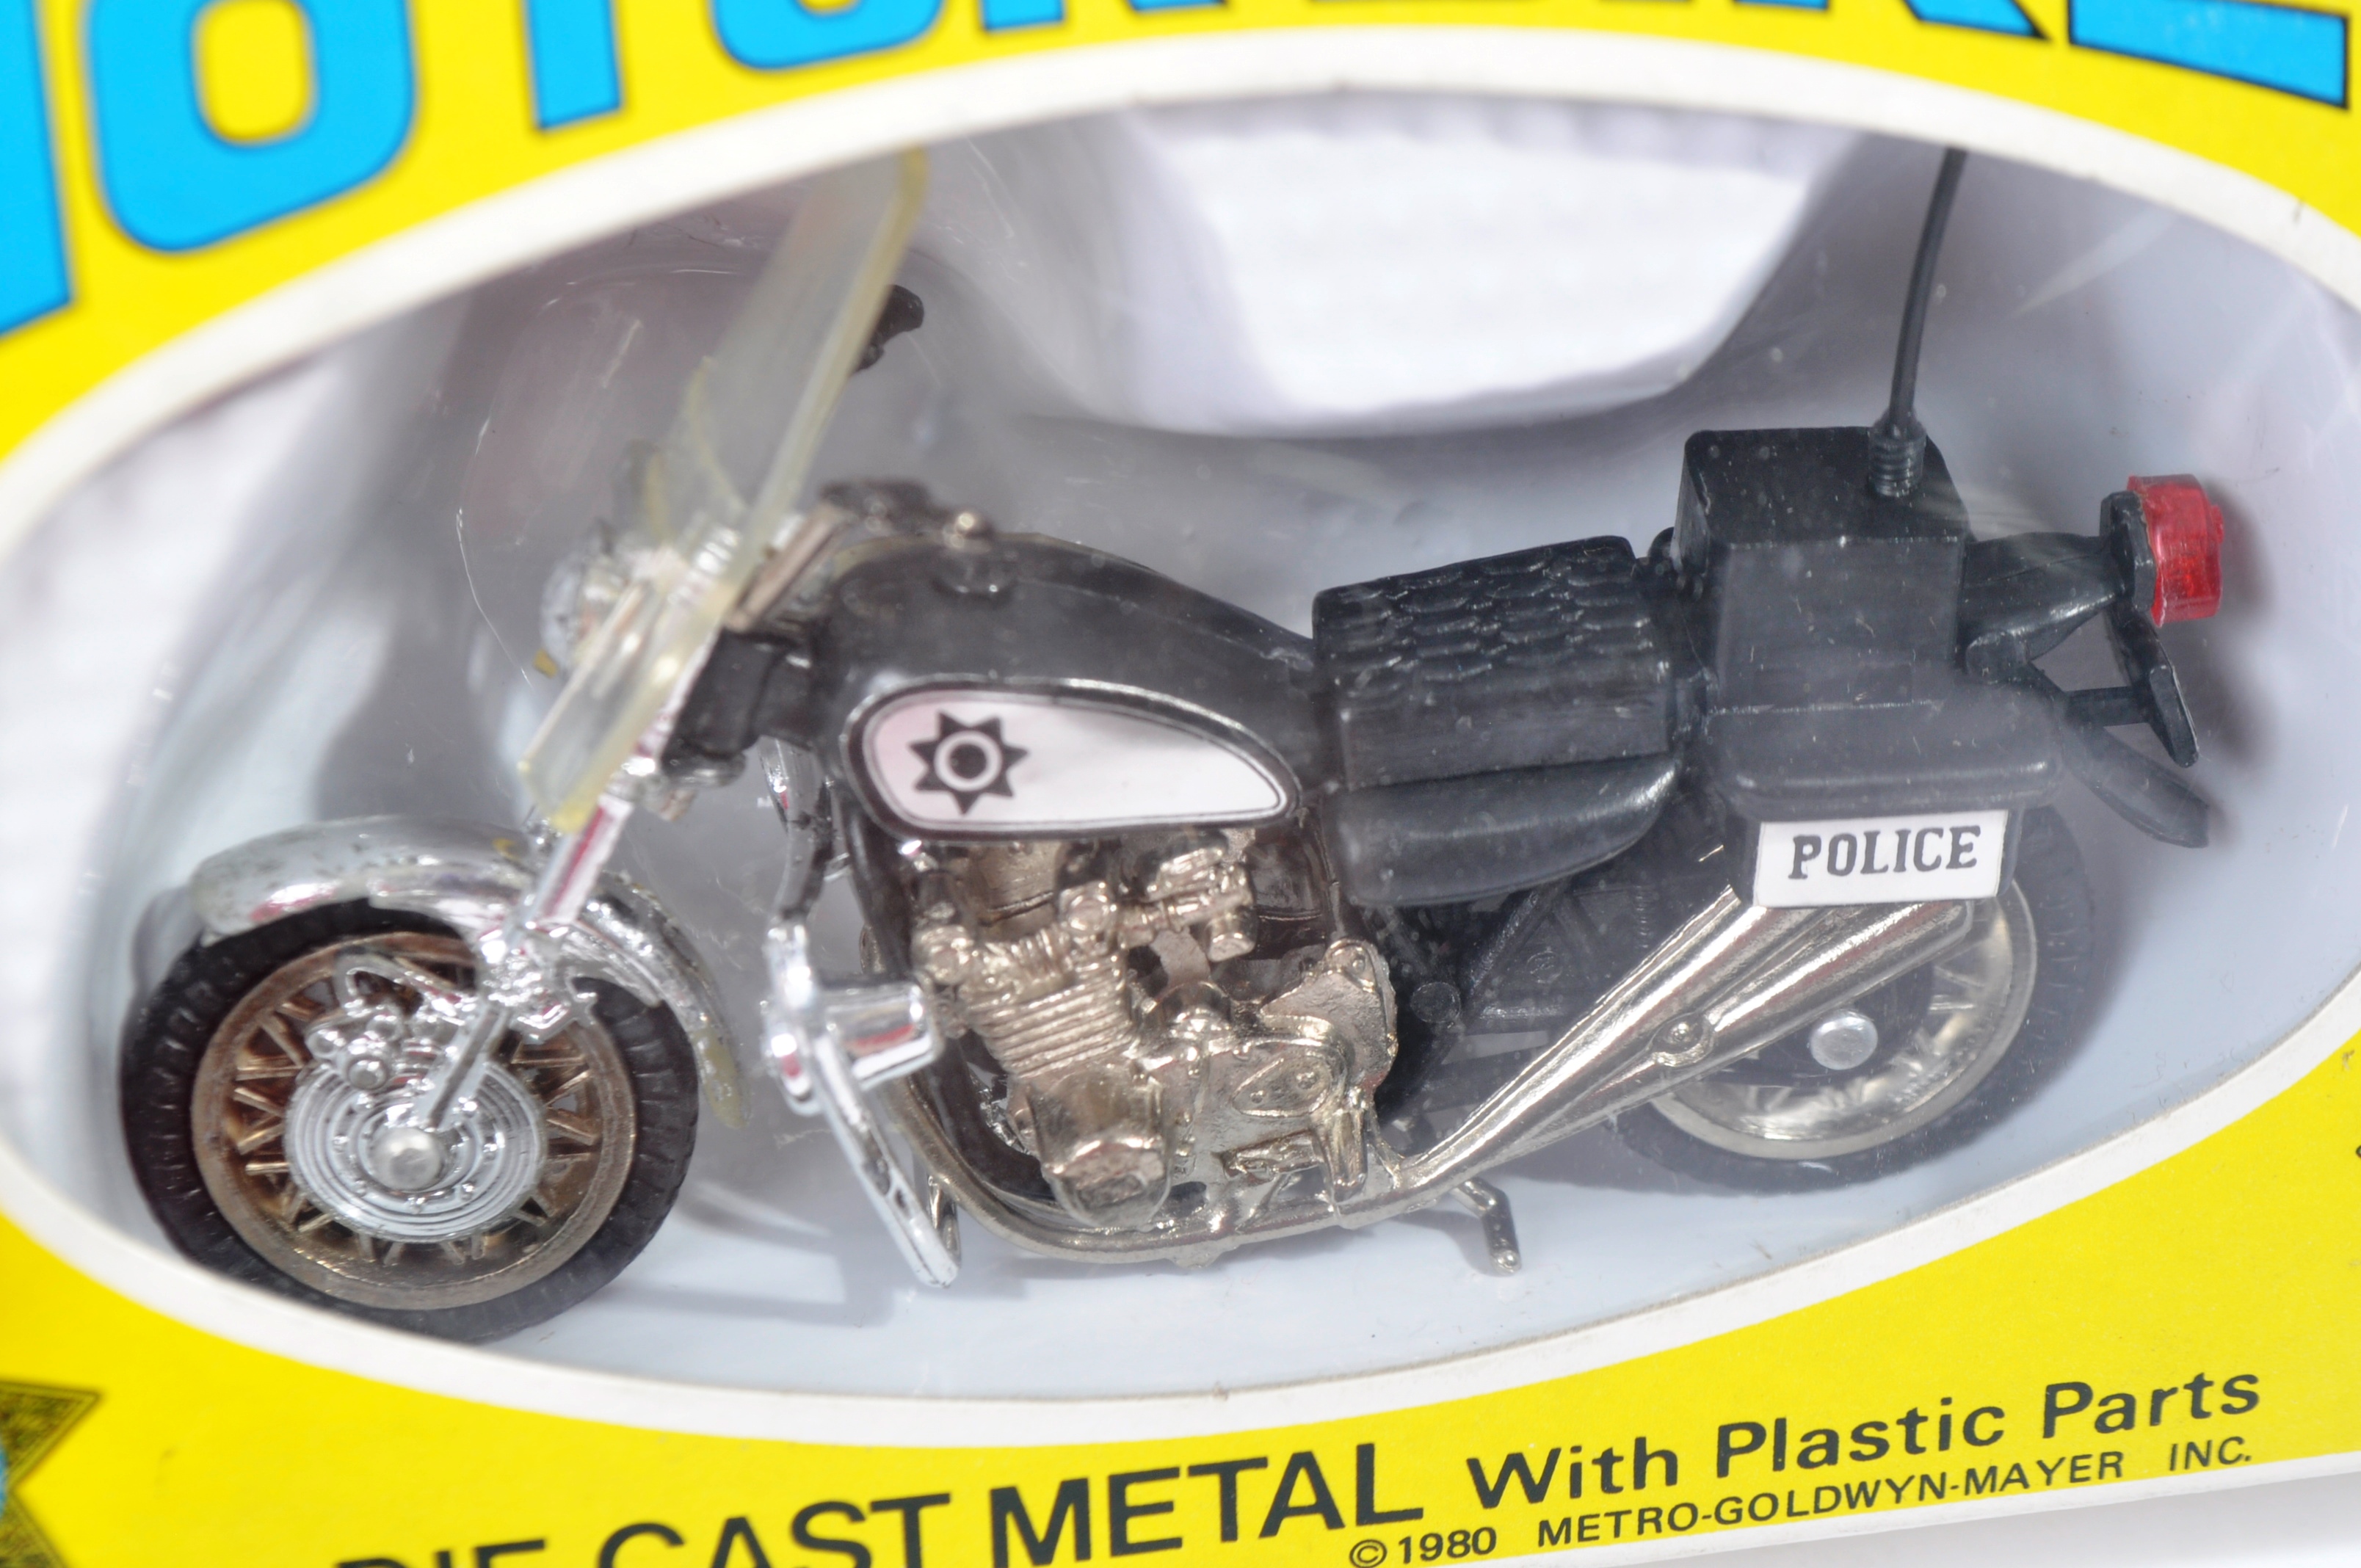 TWO ORIGINAL VINTAGE MGM ' CHIPS ' DIECAST MODEL MOTORBIKES - Image 3 of 4